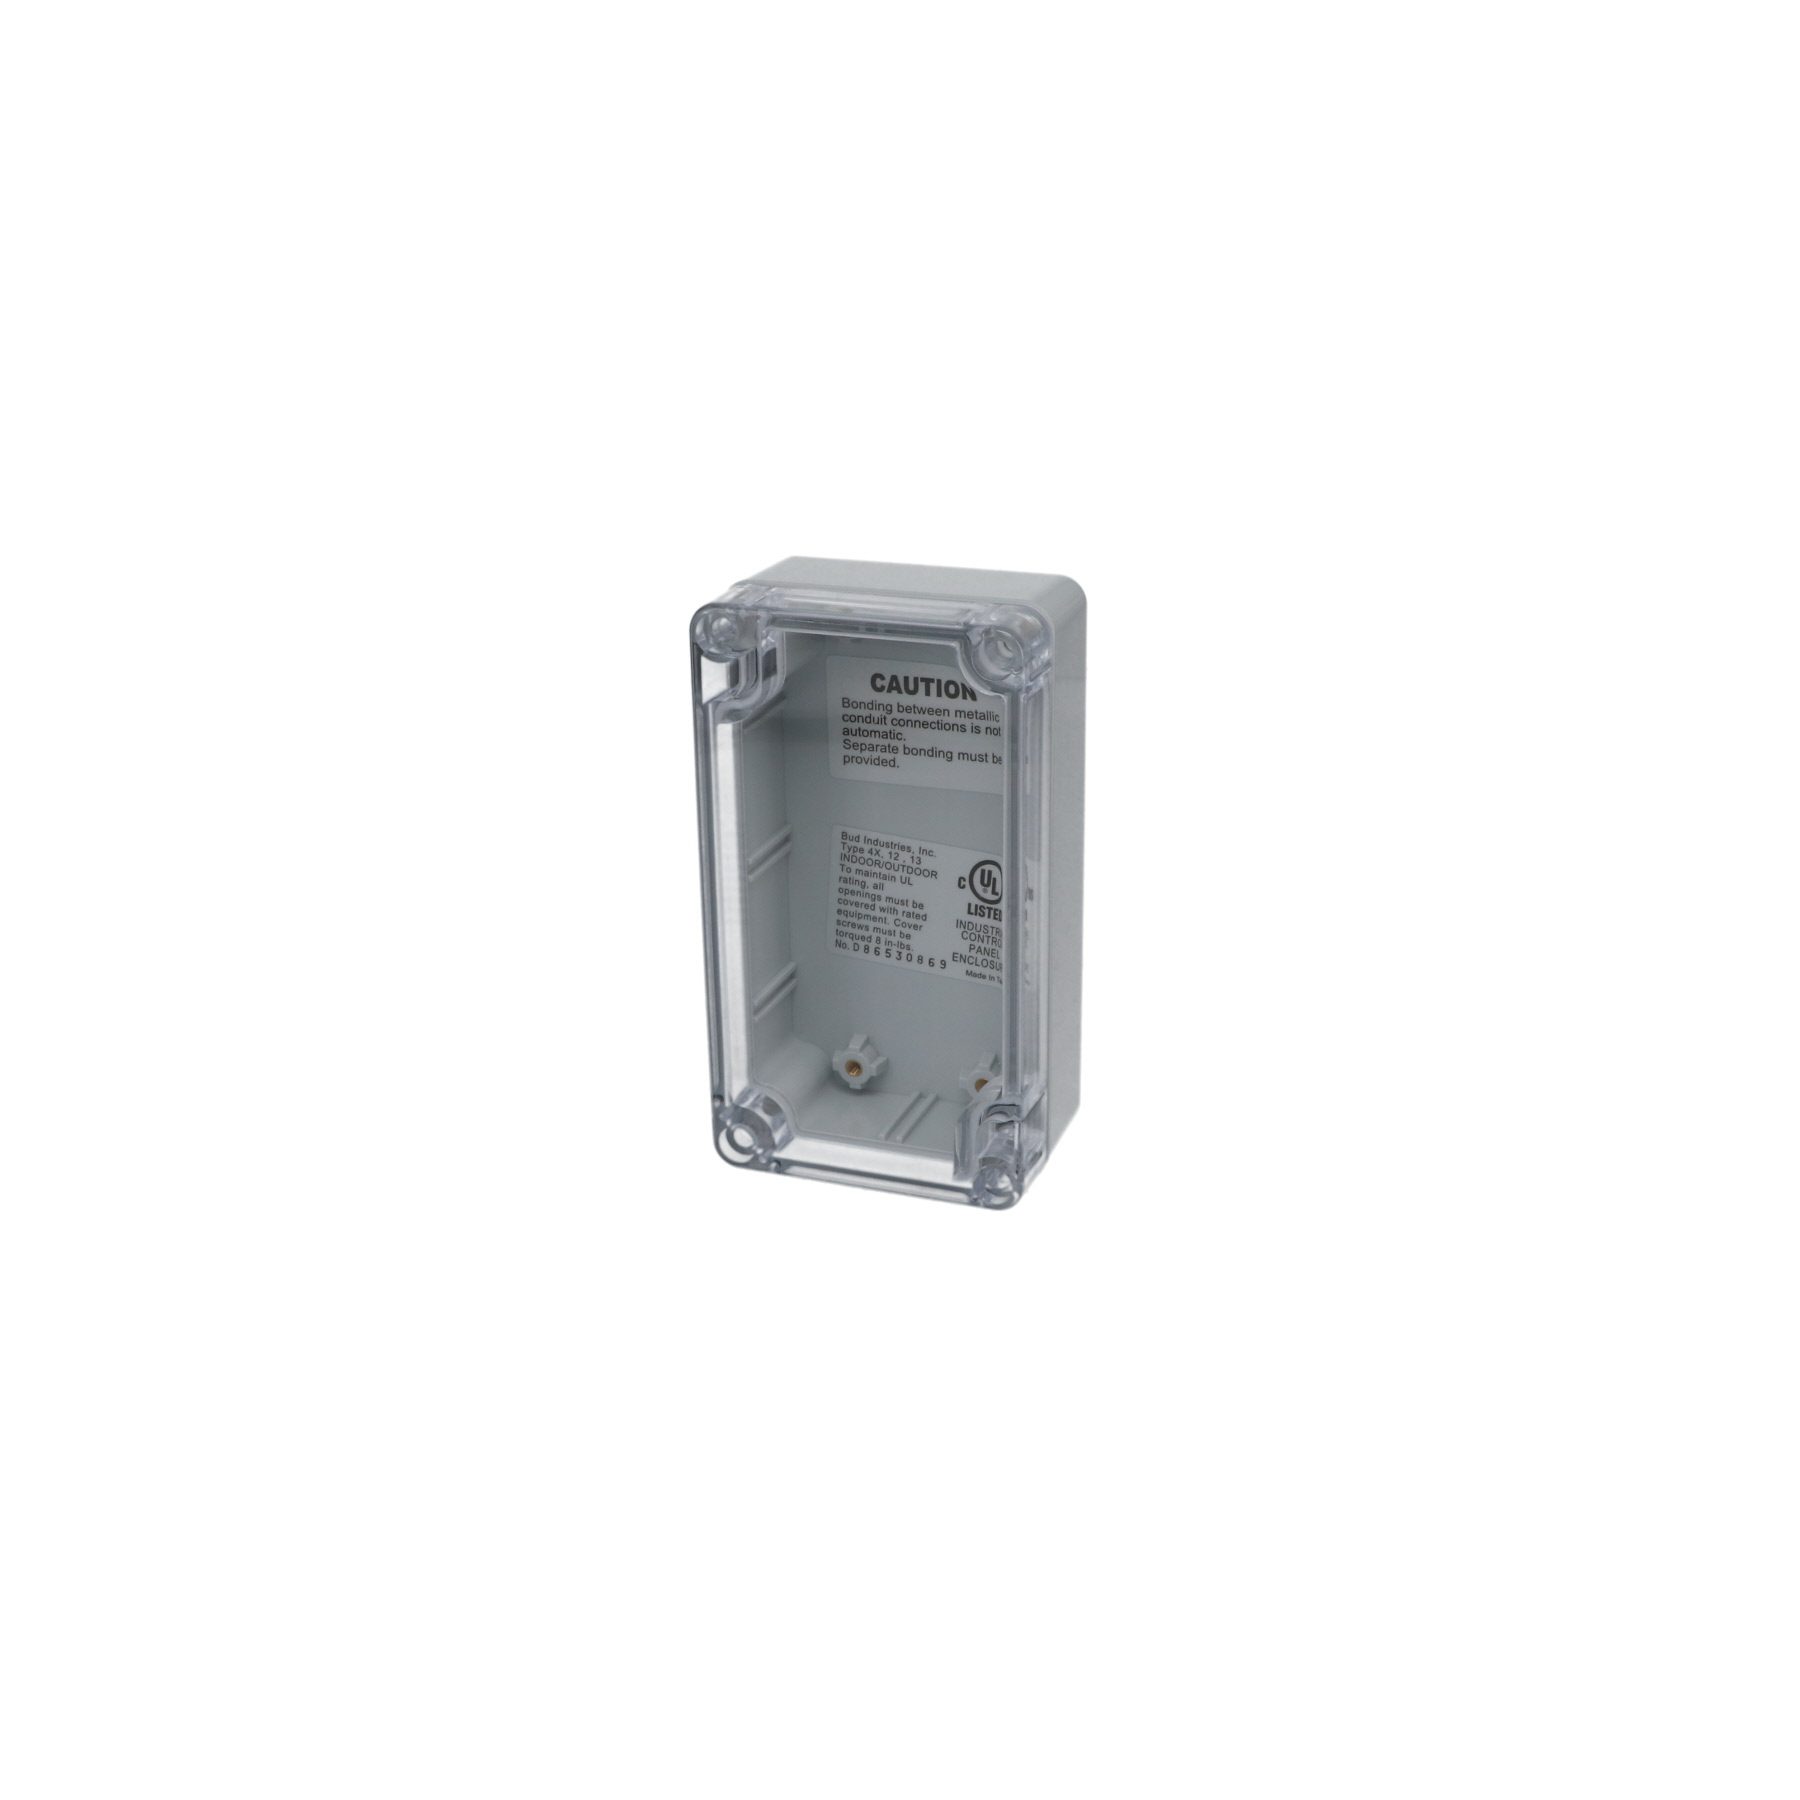 IP65 NEMA 4X Box with Clear Cover PN-1321-C